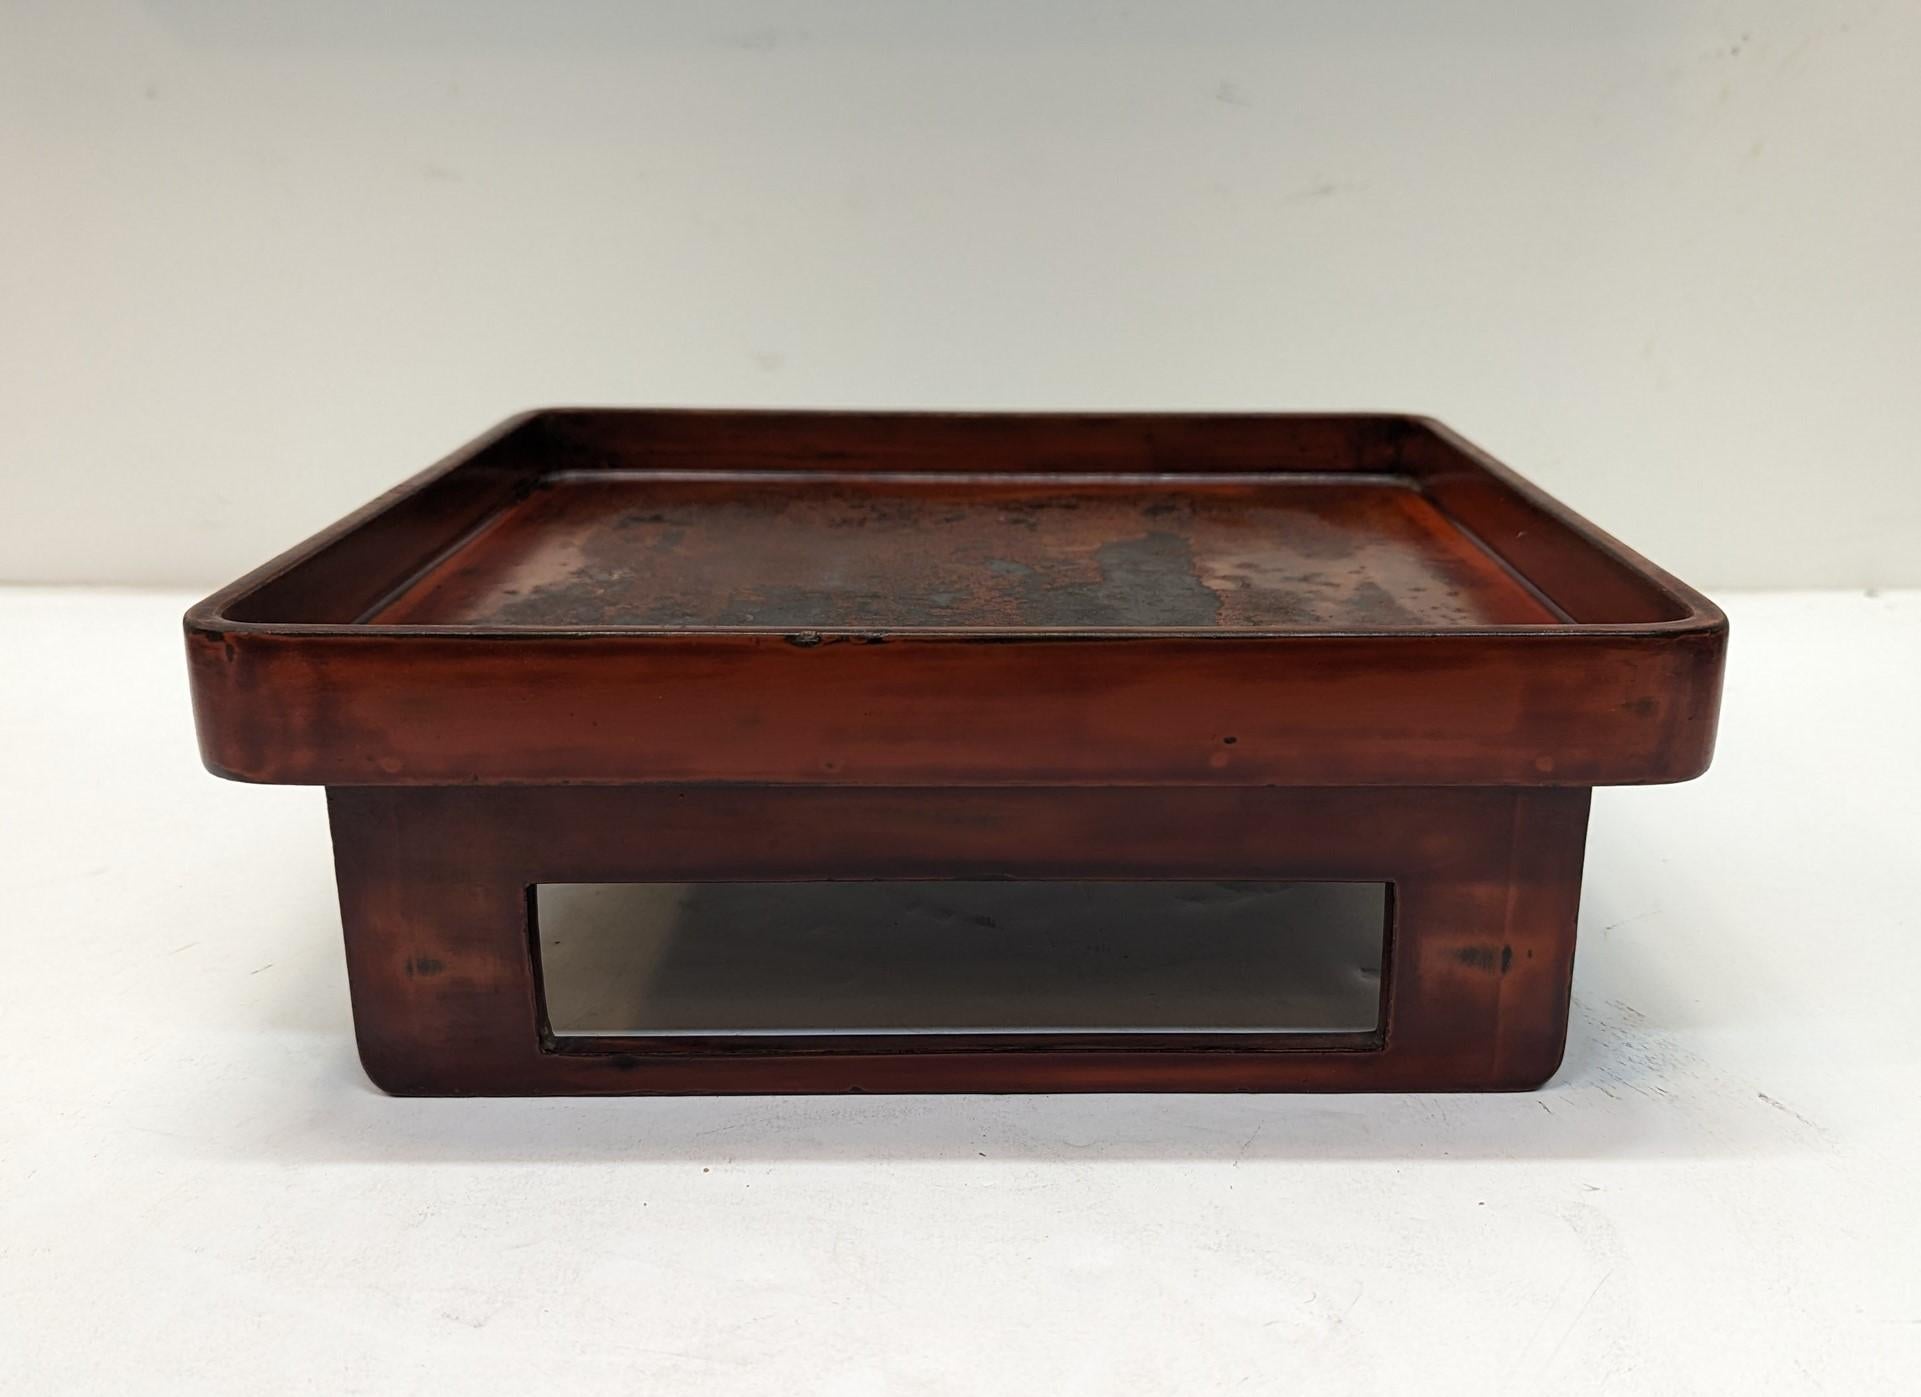 Qing Dynasty Red Lacquer Tray.  Collected outside of Shanghai said have been used as Opium tray.  Very well made by a master craftsman.  The wear to the top has created an amazing abstract effect patina to the lacquer.  In one large area being worn